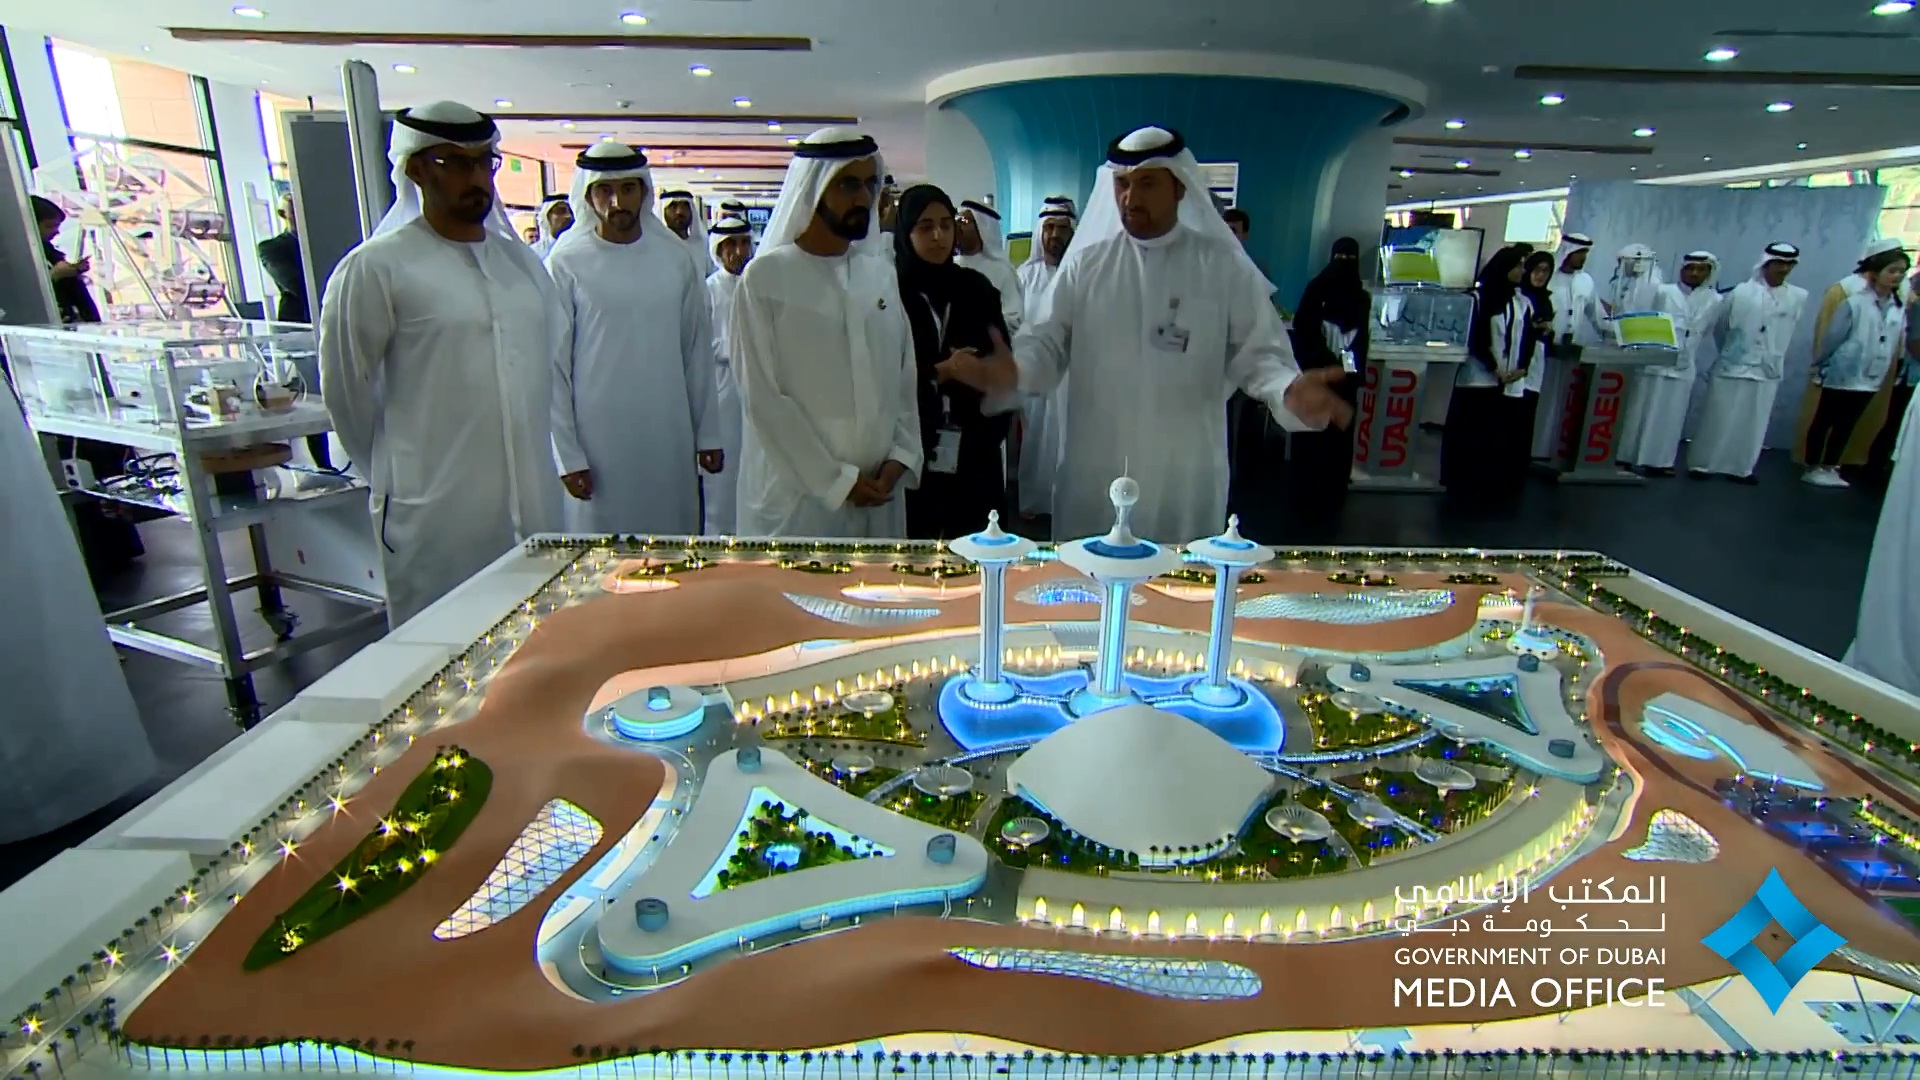 3G's UAEU Design of the Science and Innovation Research Center